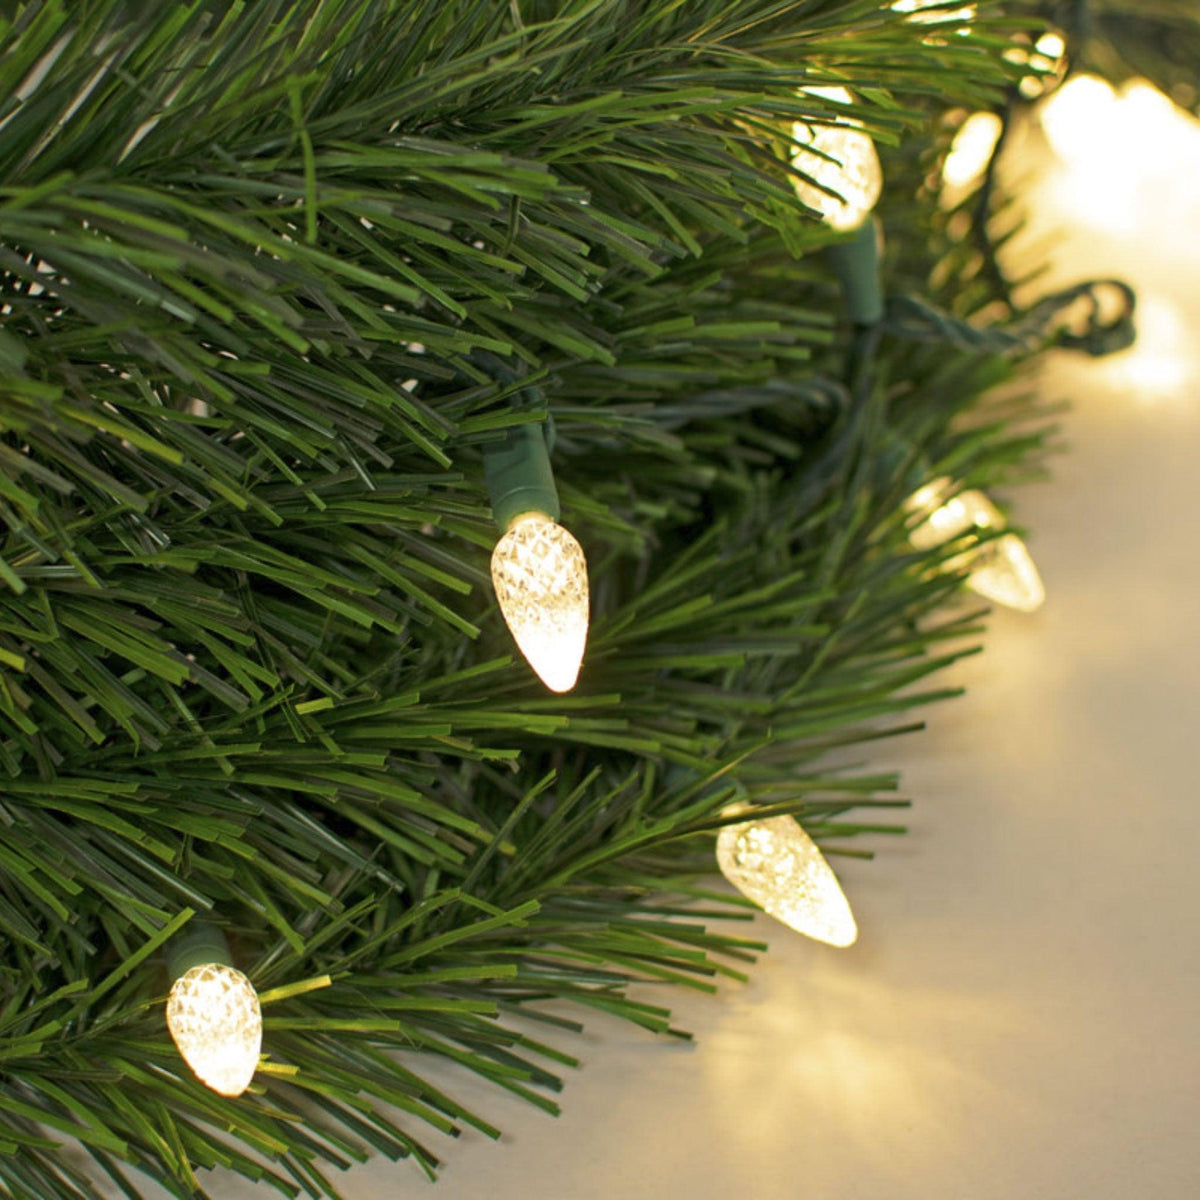 Purchase a brand new set of Lee Display's C6 LED Clear Warm White Christmas String Lights with Green Wire.  Energy-efficient lighting for outdoor use